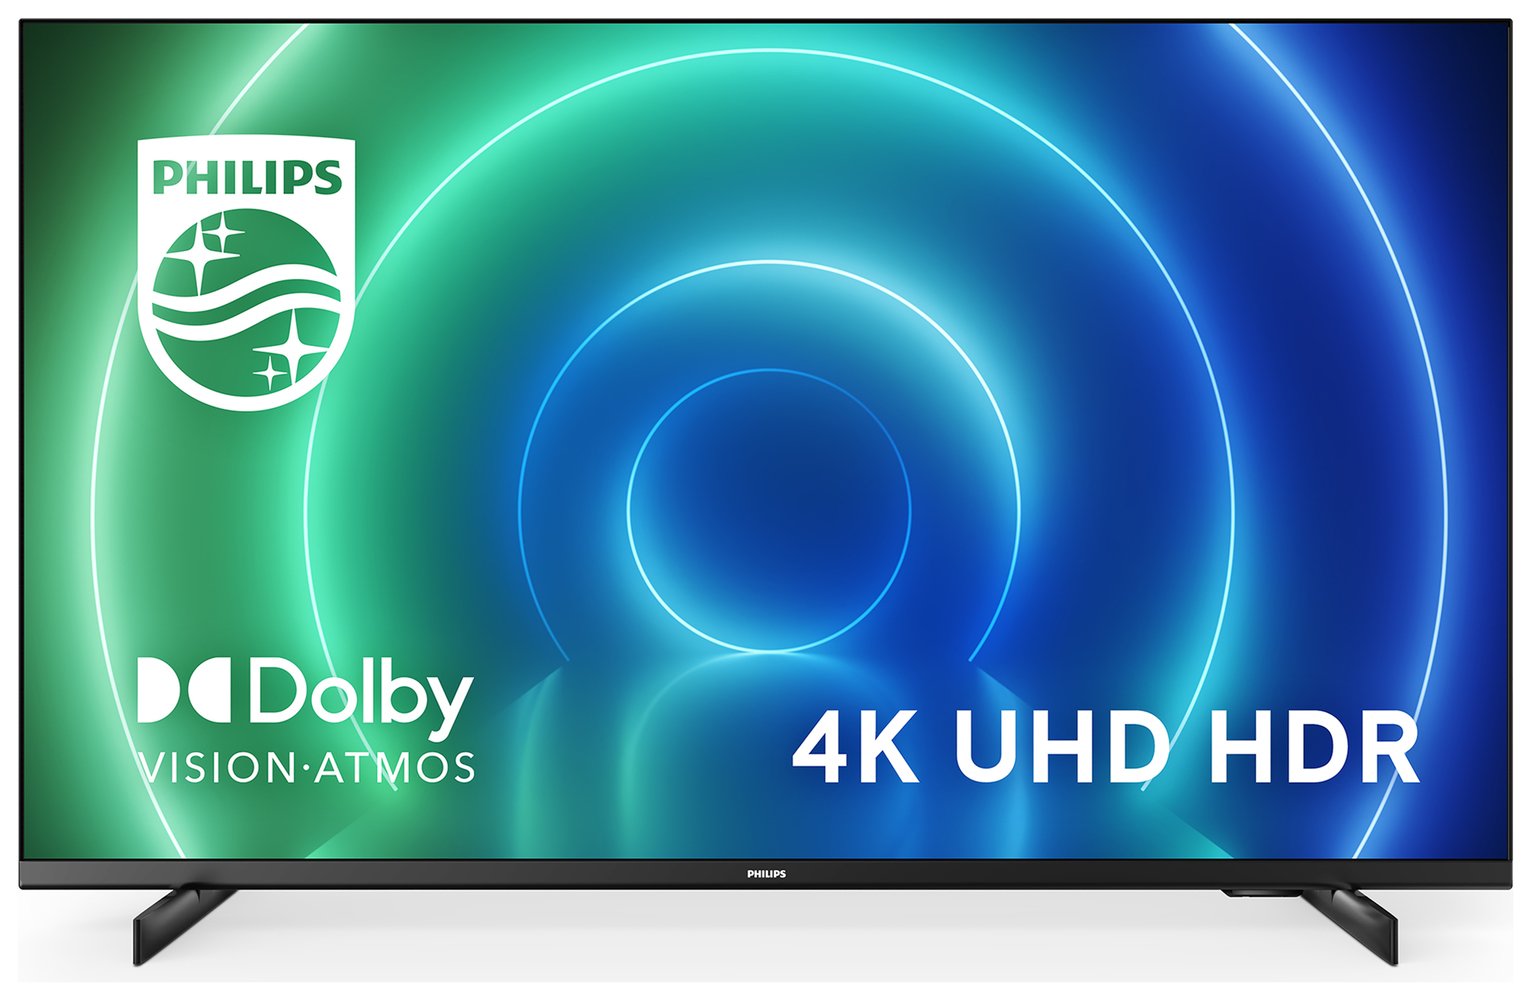 Philips 43 Inch 43PUS7506 Smart 4K UHD HDR LED Freeview TV